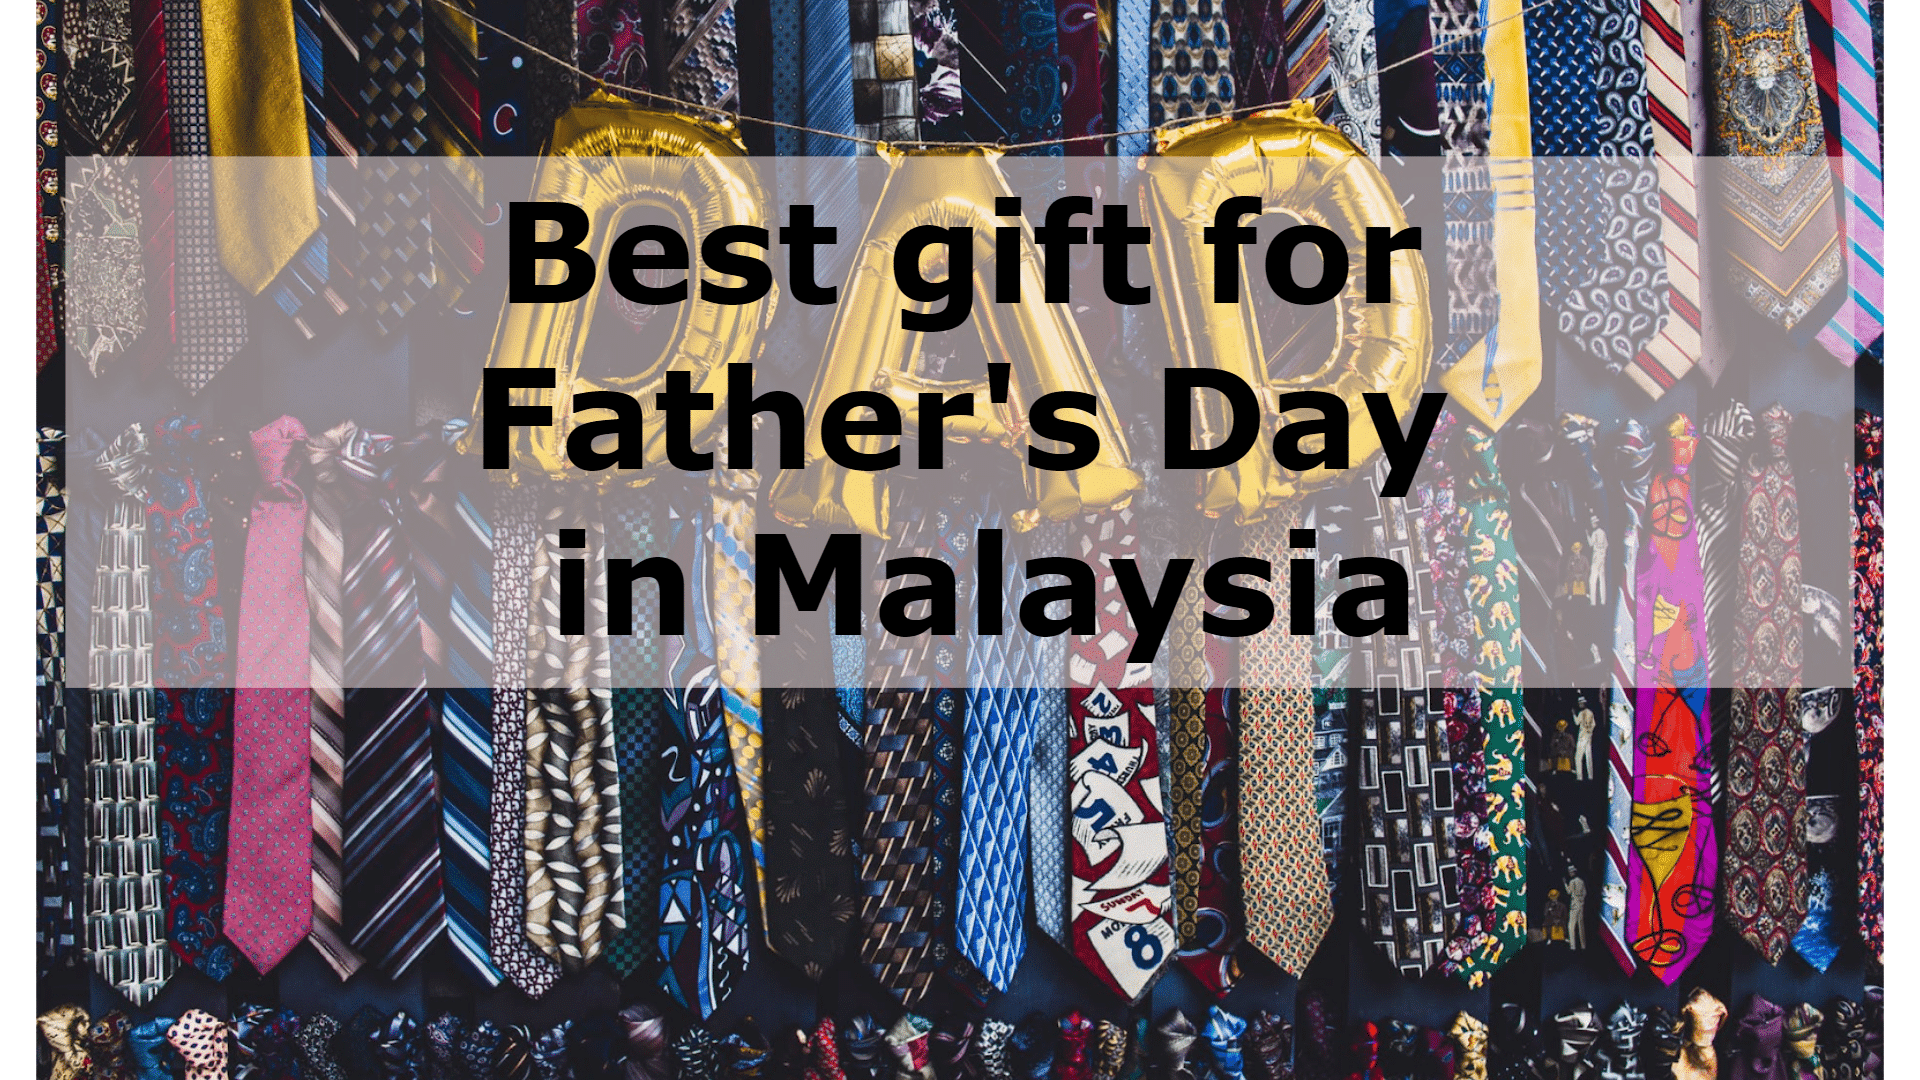 Best gift for Father's Day Malaysia, Best Father's Day Gifts for Dad, What do dads want for Father's Day in Malaysia?, What is a good cheap gift for Father's Day in Malaysia?, Do you give gifts on Father's Day in Malaysia?, gifts for dad who wants nothing, simple father's day gift ideas, father's day gift ideas 2022, father's day gift ideas during covid, father's day gift ideas from daughter, unique gifts for dad, father's day gift ideas from wife, fathers day gifts from son, What buy for a dad that doesn't want anything?, What to get a dad that is hard to buy for?, What should I get my boring dad for Christmas?, What gifts do dads like?,